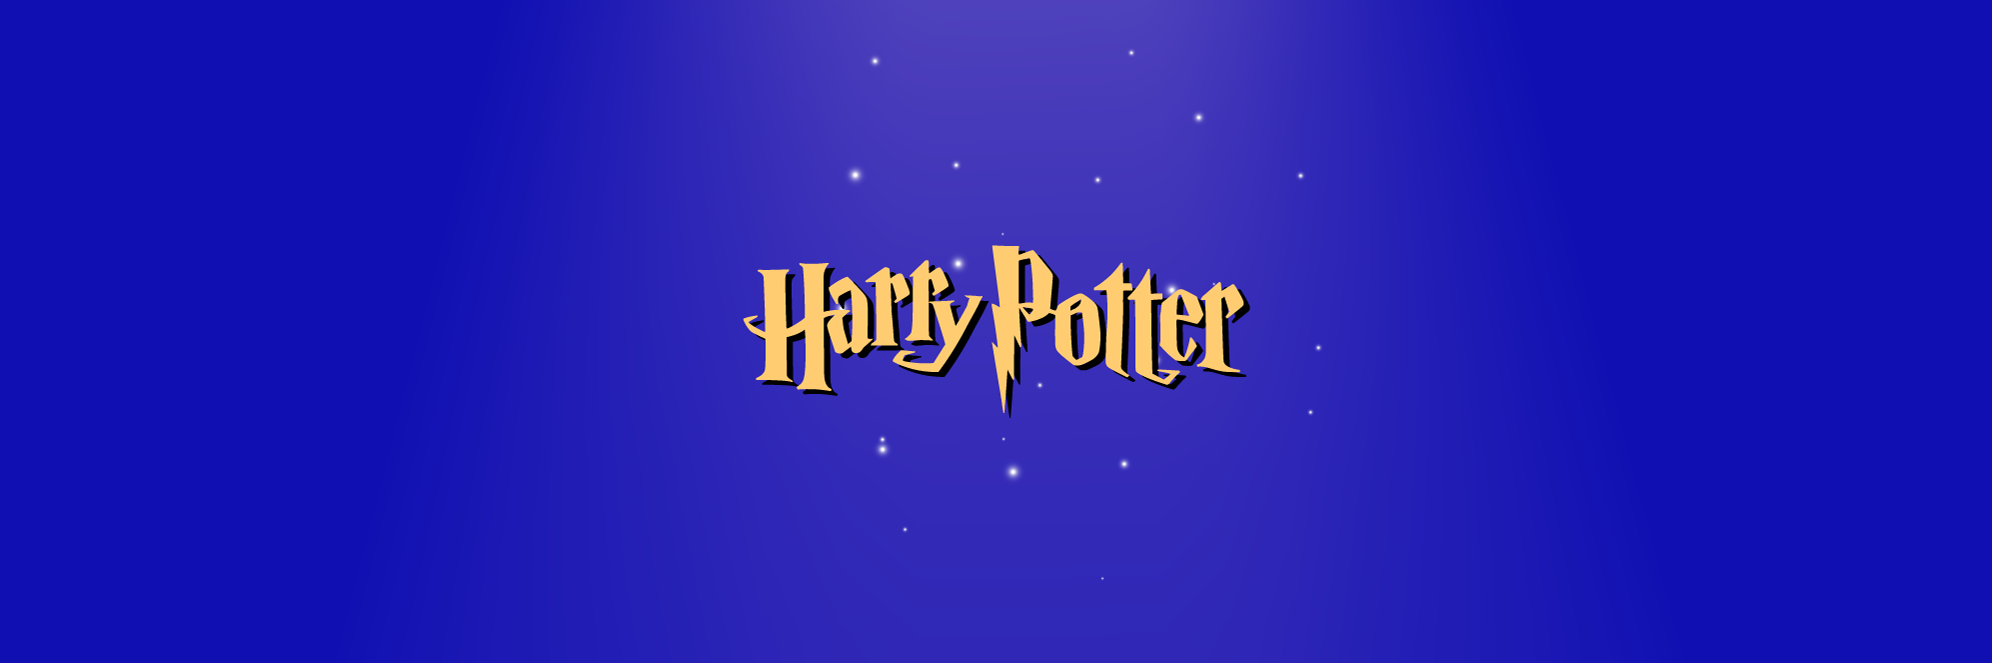 Harry Potter | Wizarding World Action Figures | ToyDip